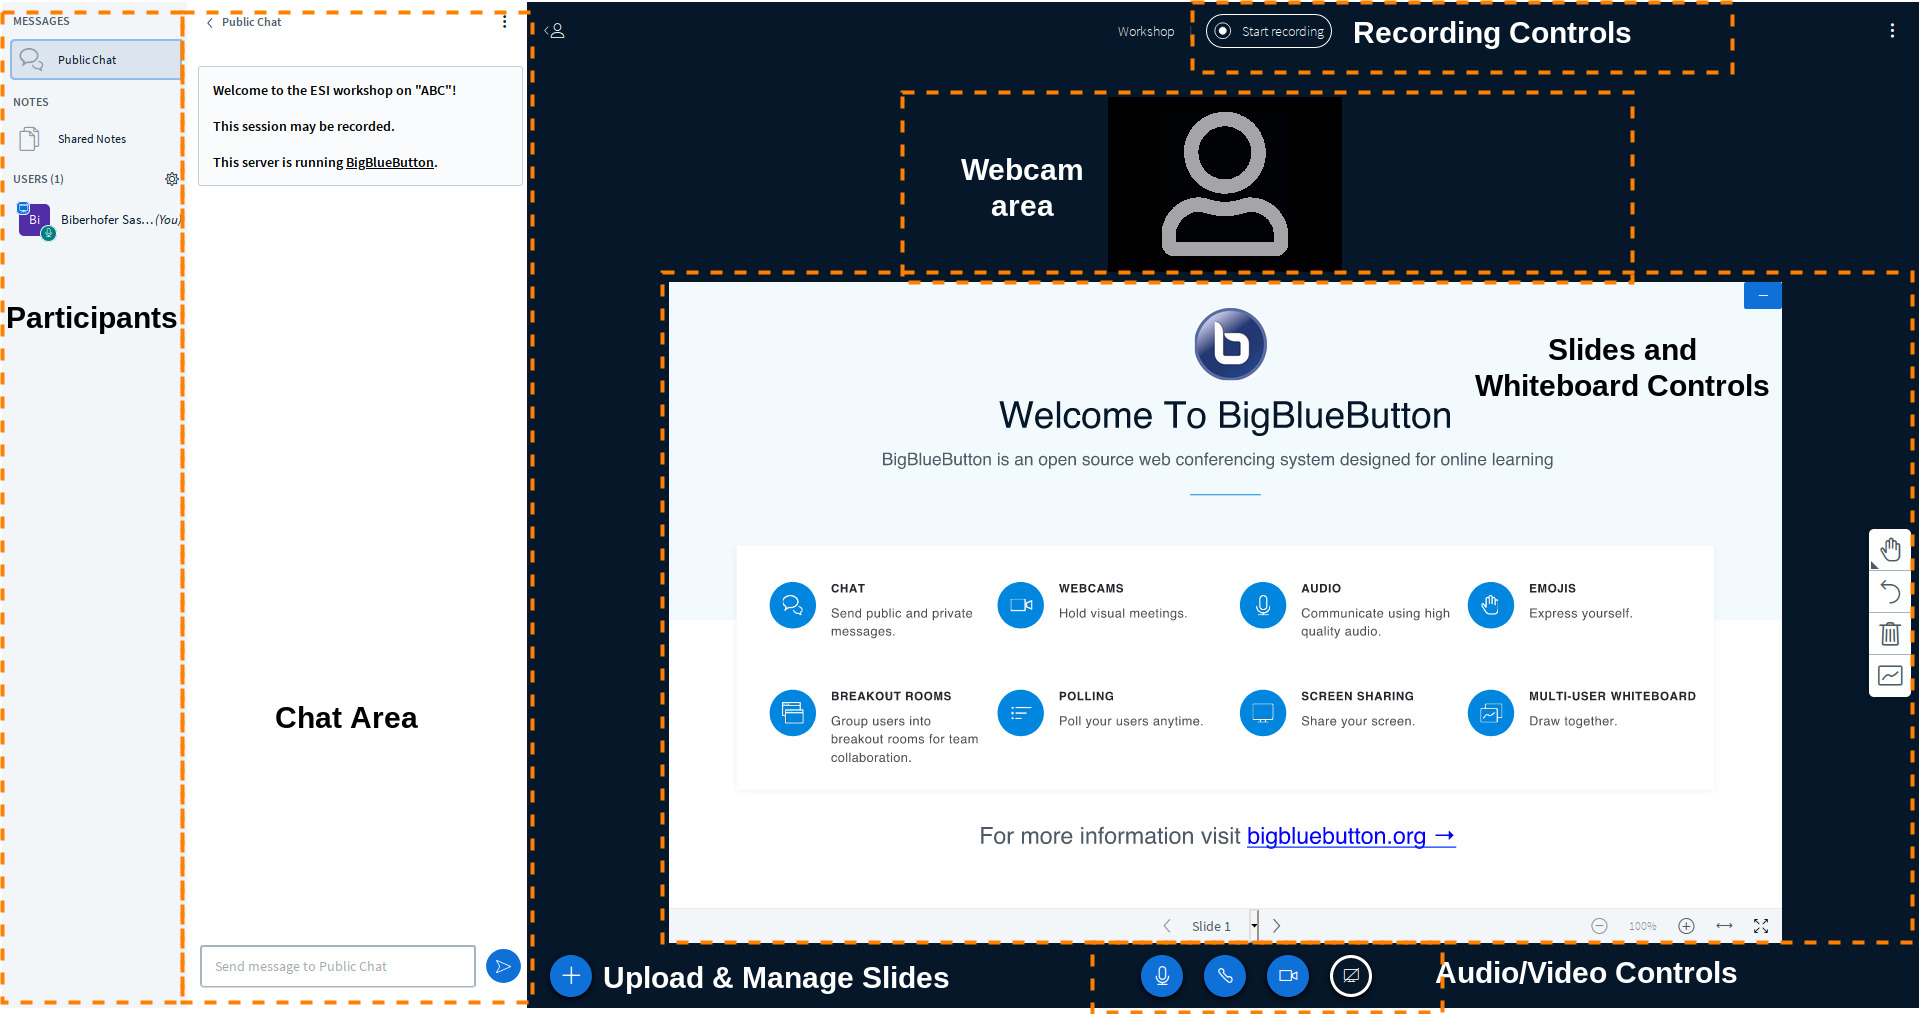 an overview of the BigBlueButton interface